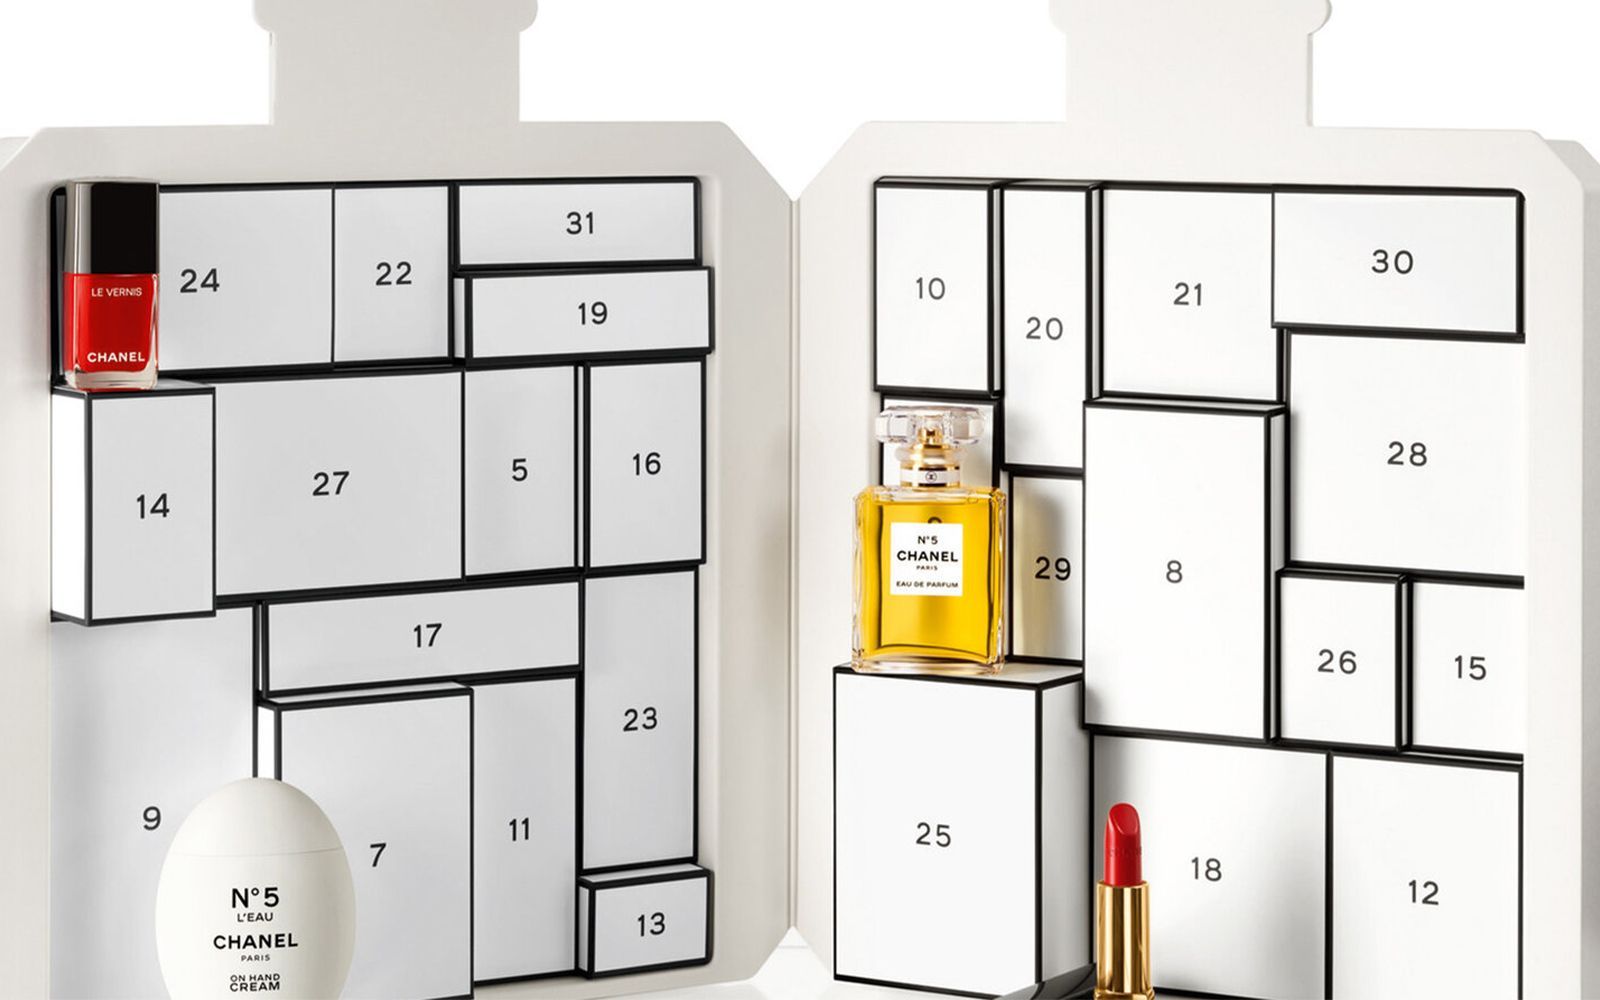 Dior criticised over gifts included in $3,500 advent calendar, from candle  lid to sample perfumes